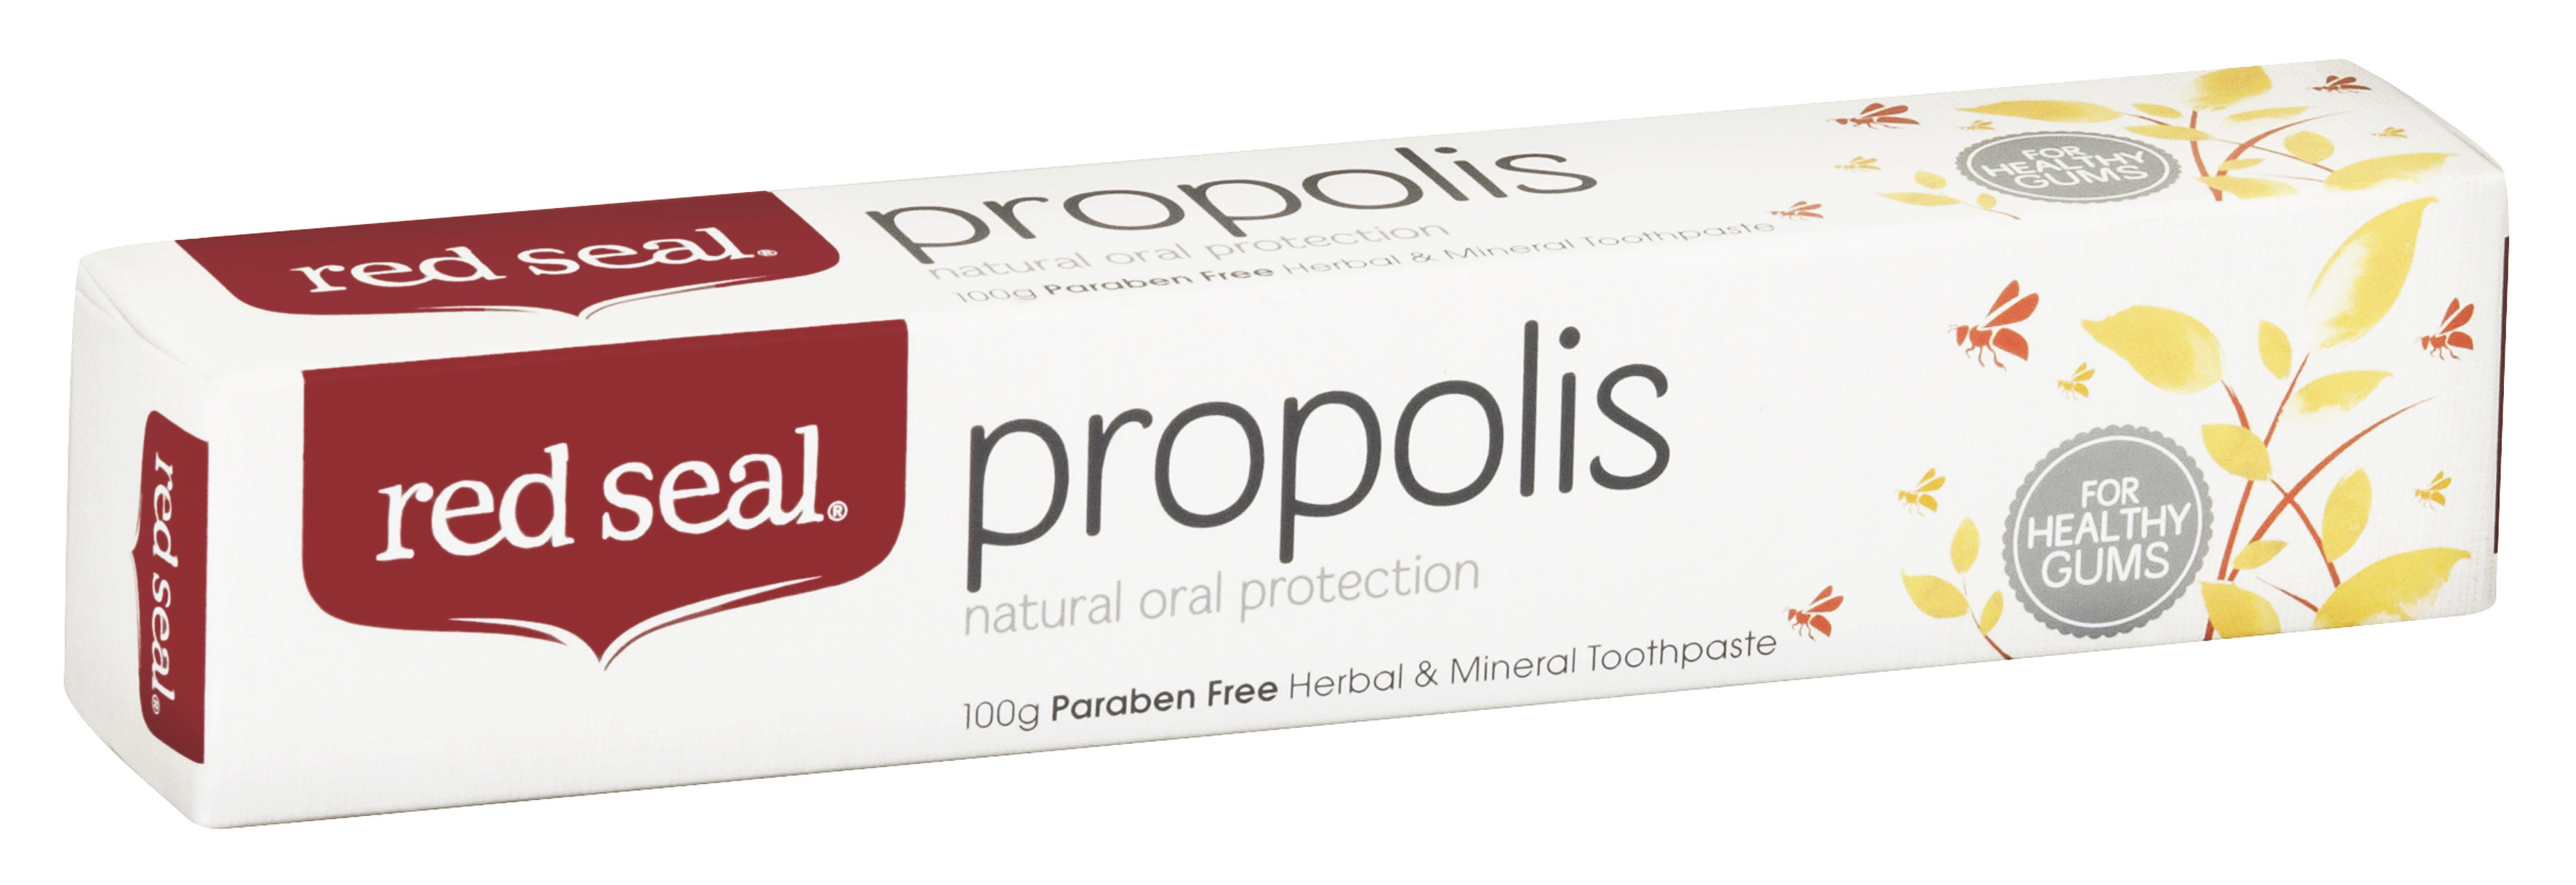 Red-seal-propolis-toothpaste